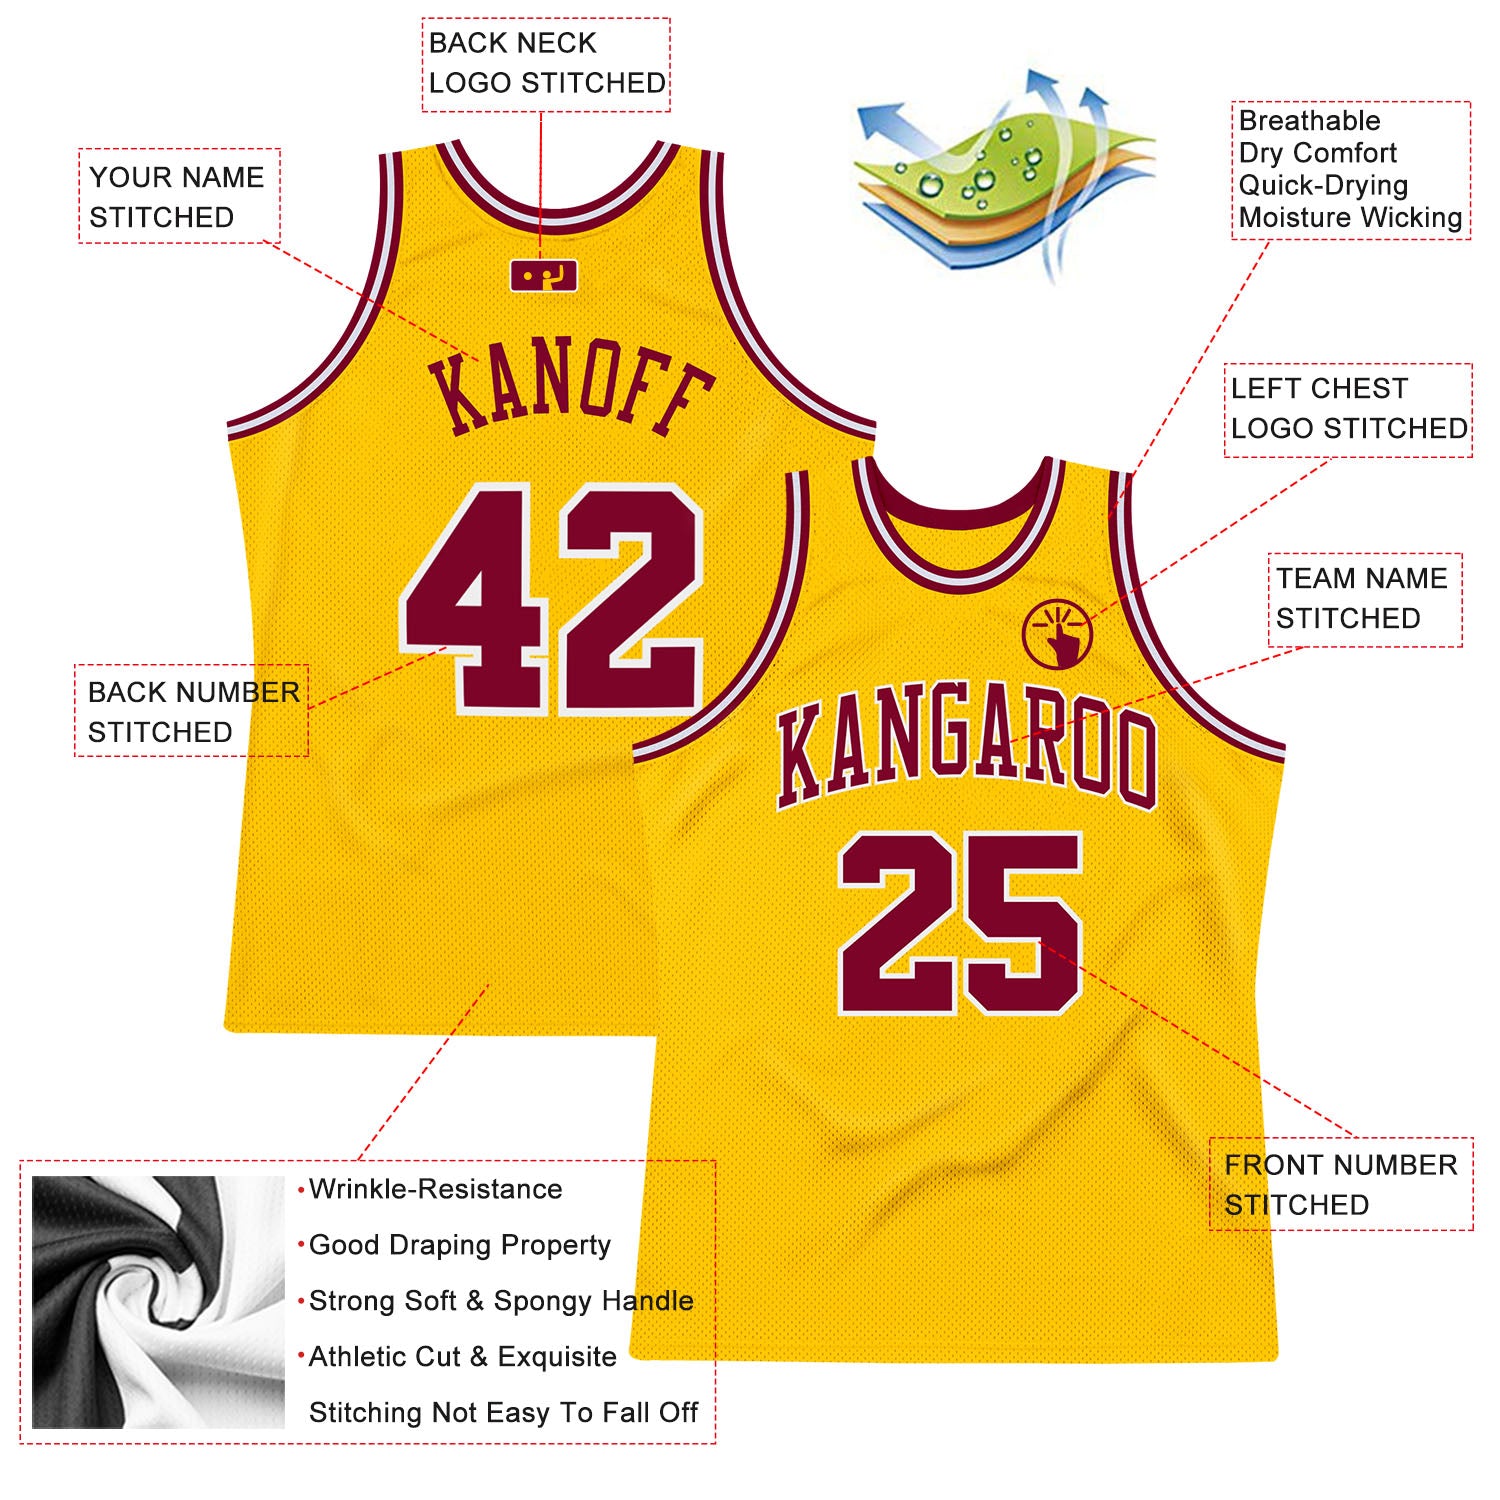 Sale Build Royal Basketball Authentic White Throwback Jersey Maroon –  CustomJerseysPro